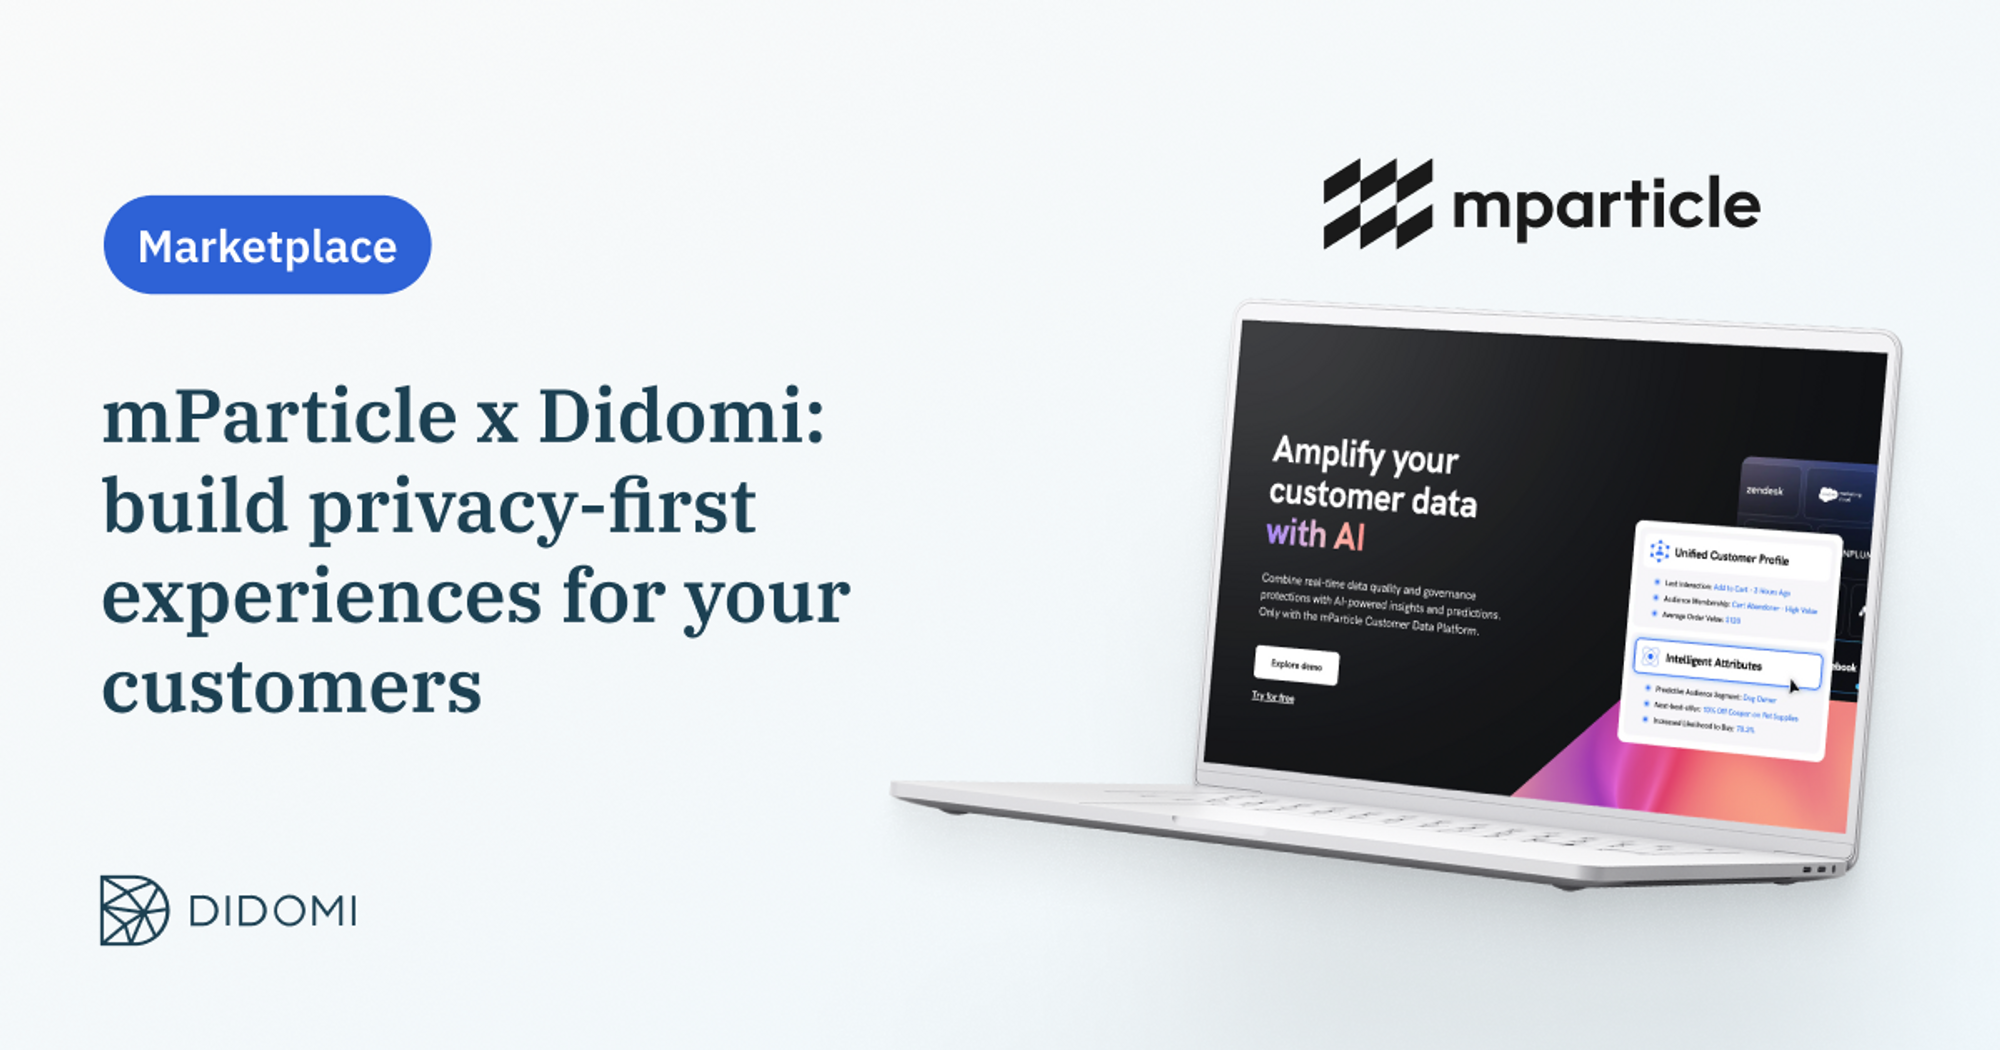 mParticle x Didomi: build privacy-first experiences for your customers